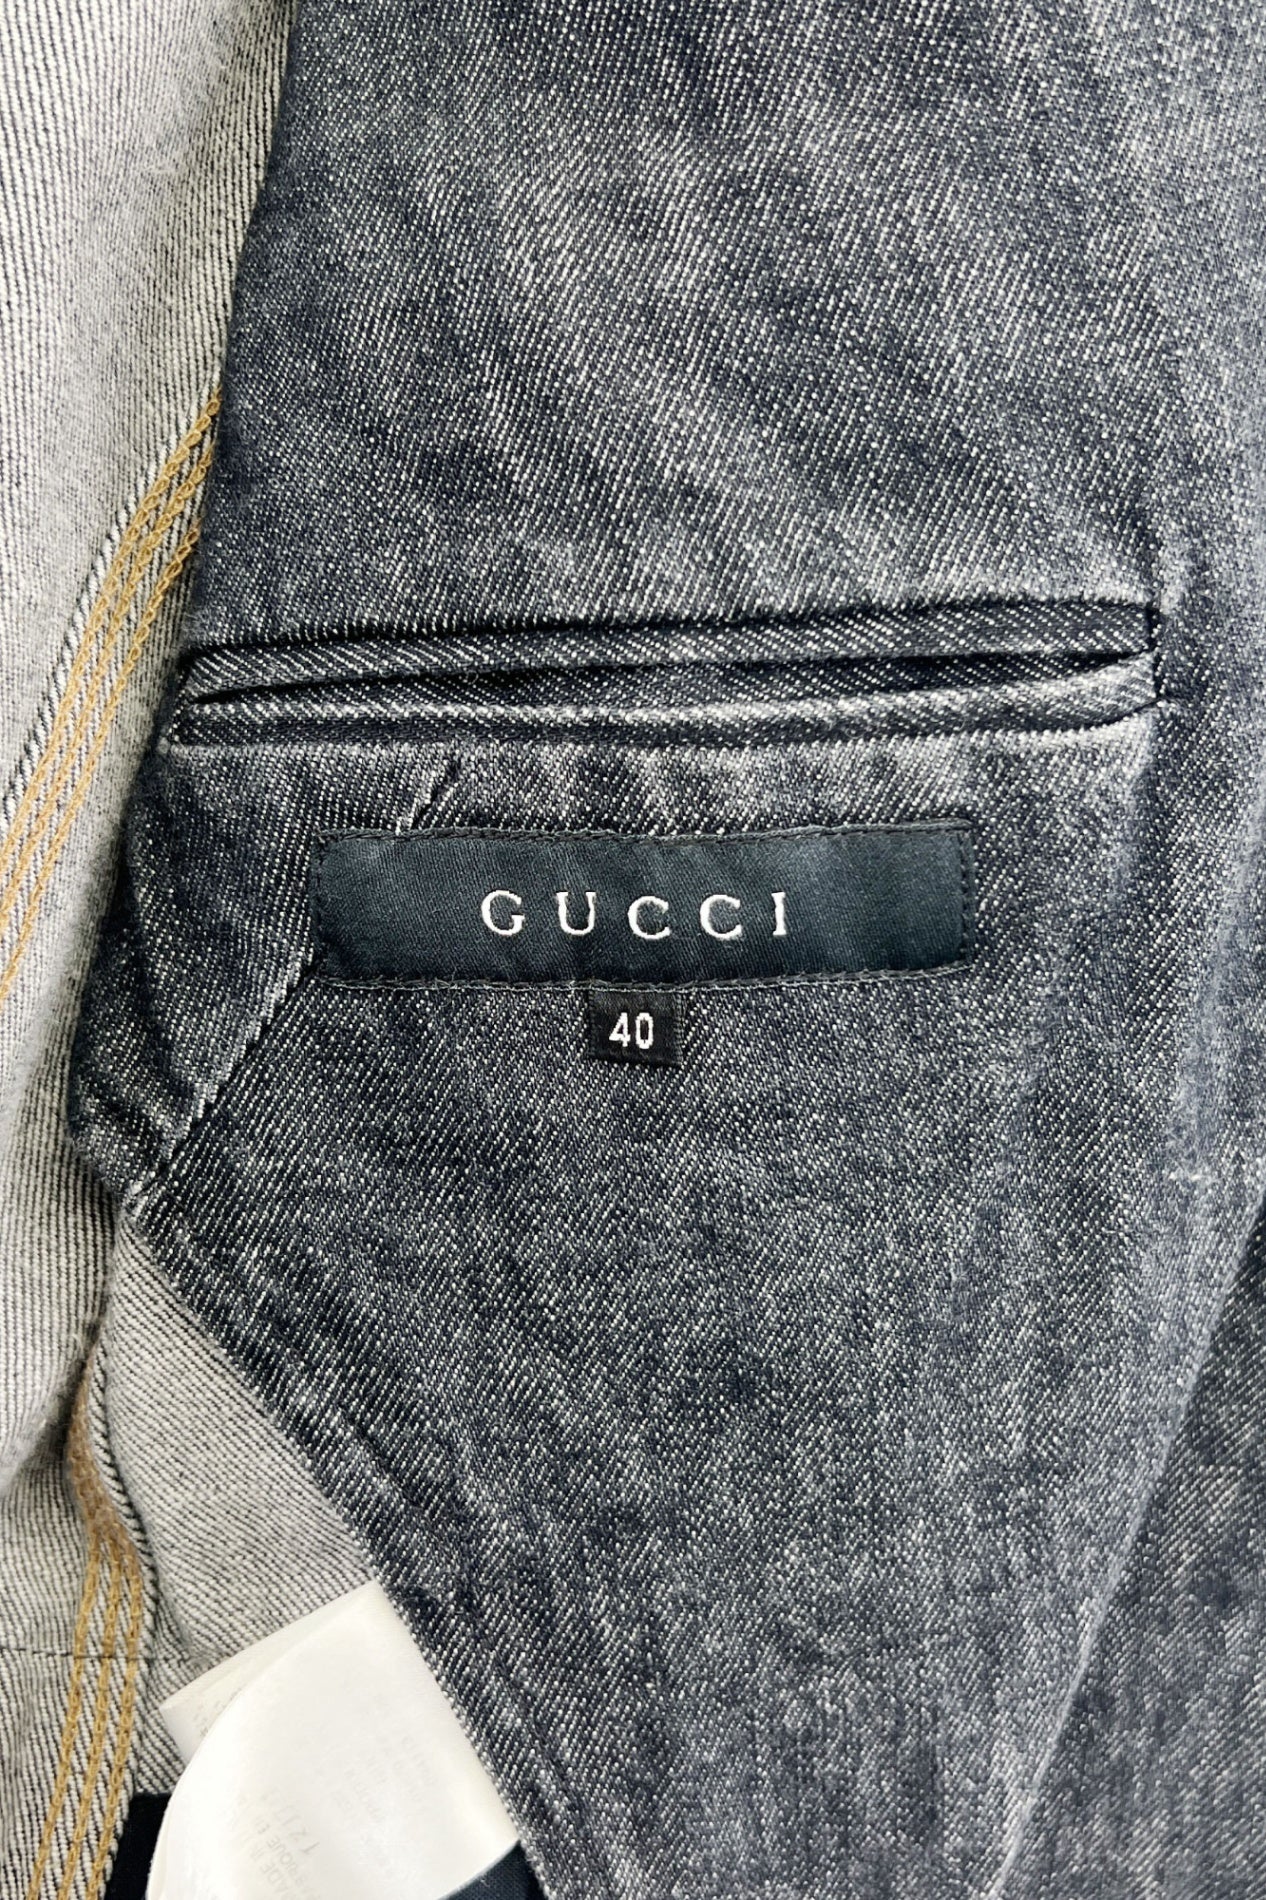 Made in ITALY GUCCI denim jacket